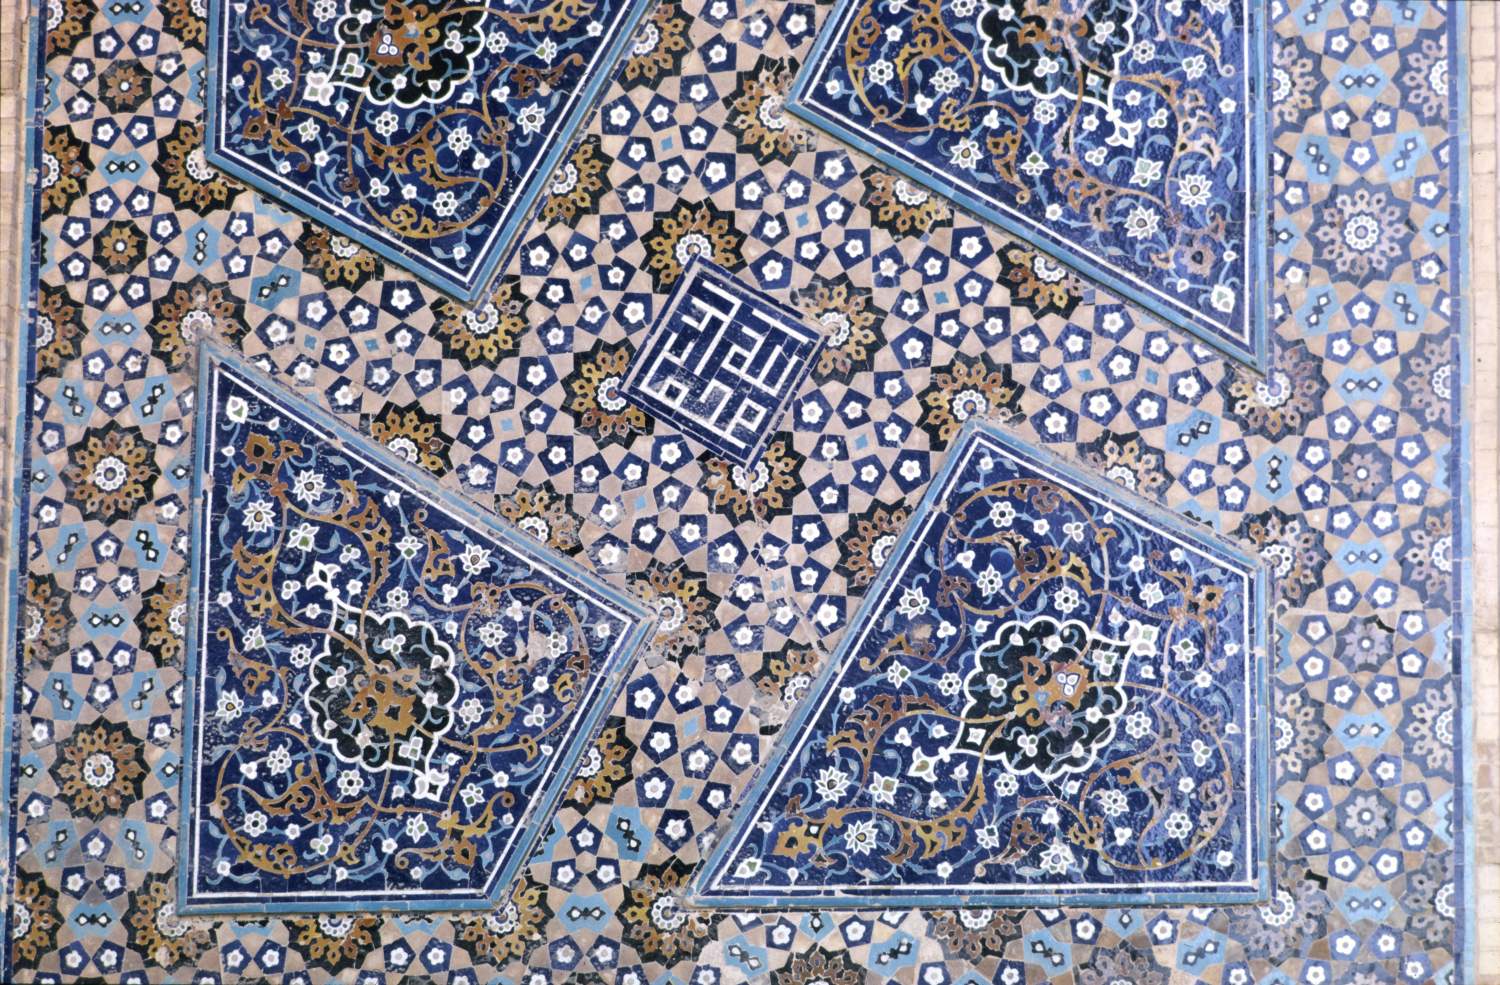 Detail of tile mosaic ornament on facade in courtyard, featuring geometric pattern.